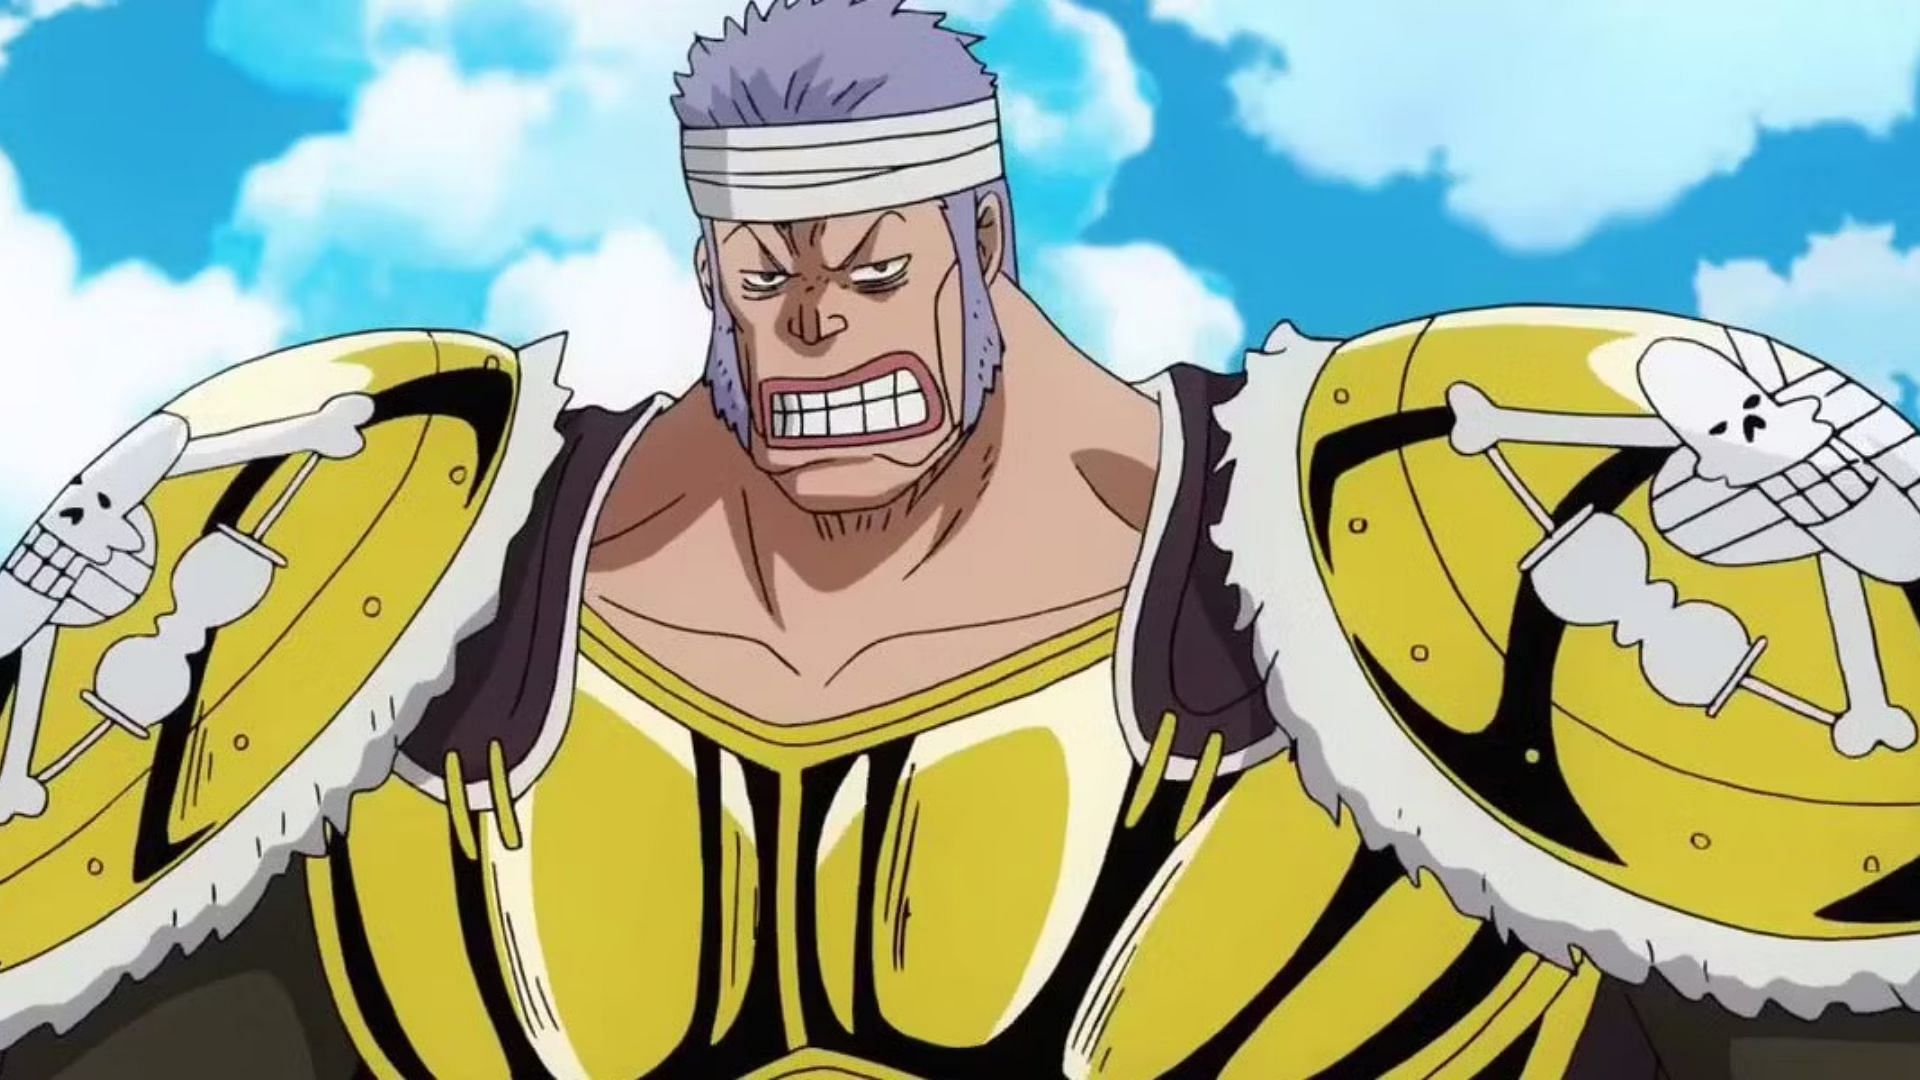 Don Krieg as shown in the anime series (Image via Toei Animation)